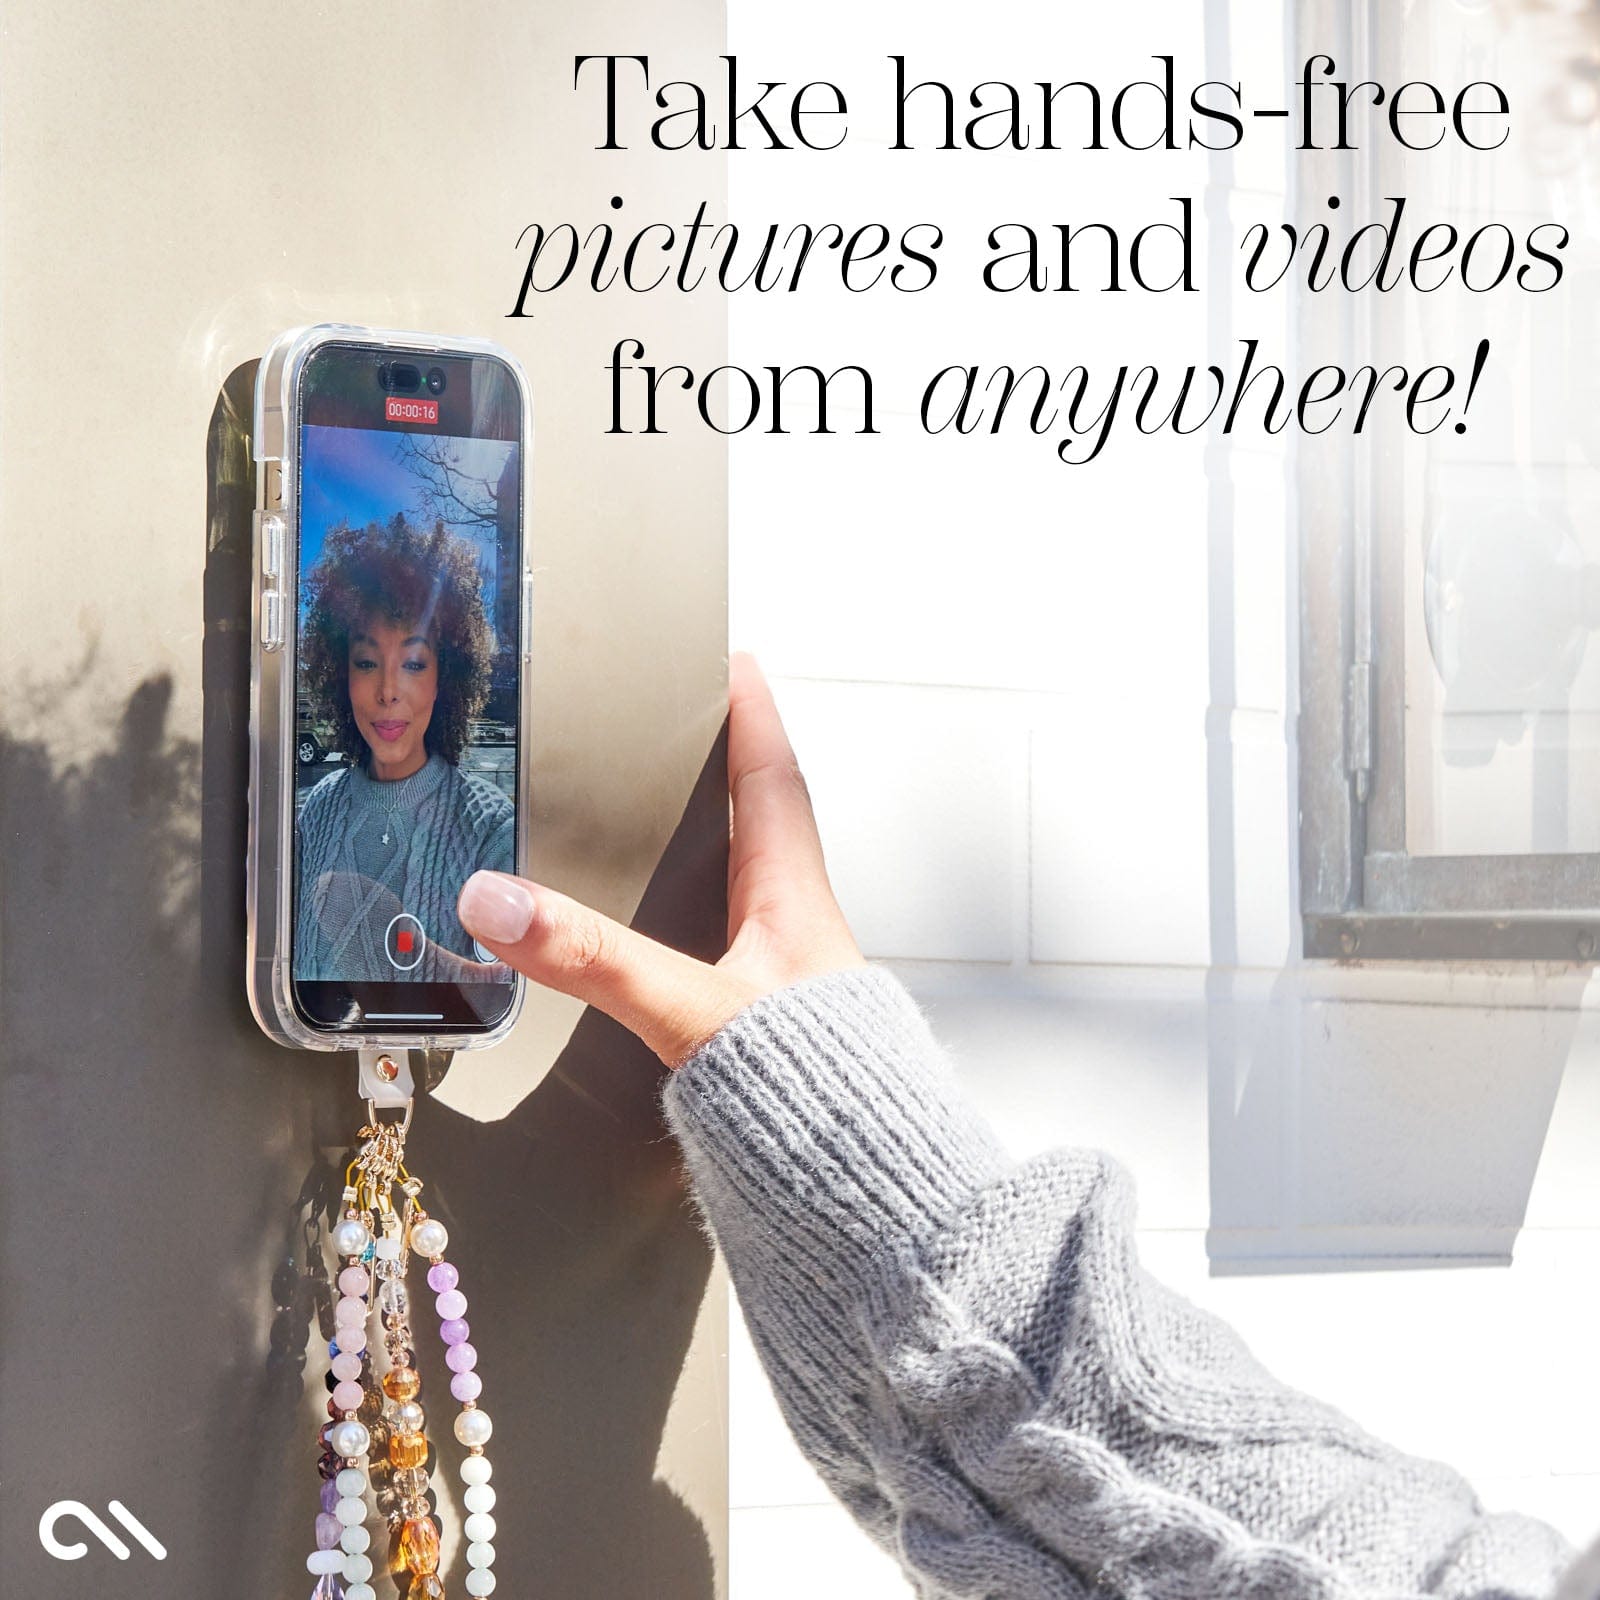 TAKE HANDS FREE PICTURES AND VIDEOS FROM ANYWHERE